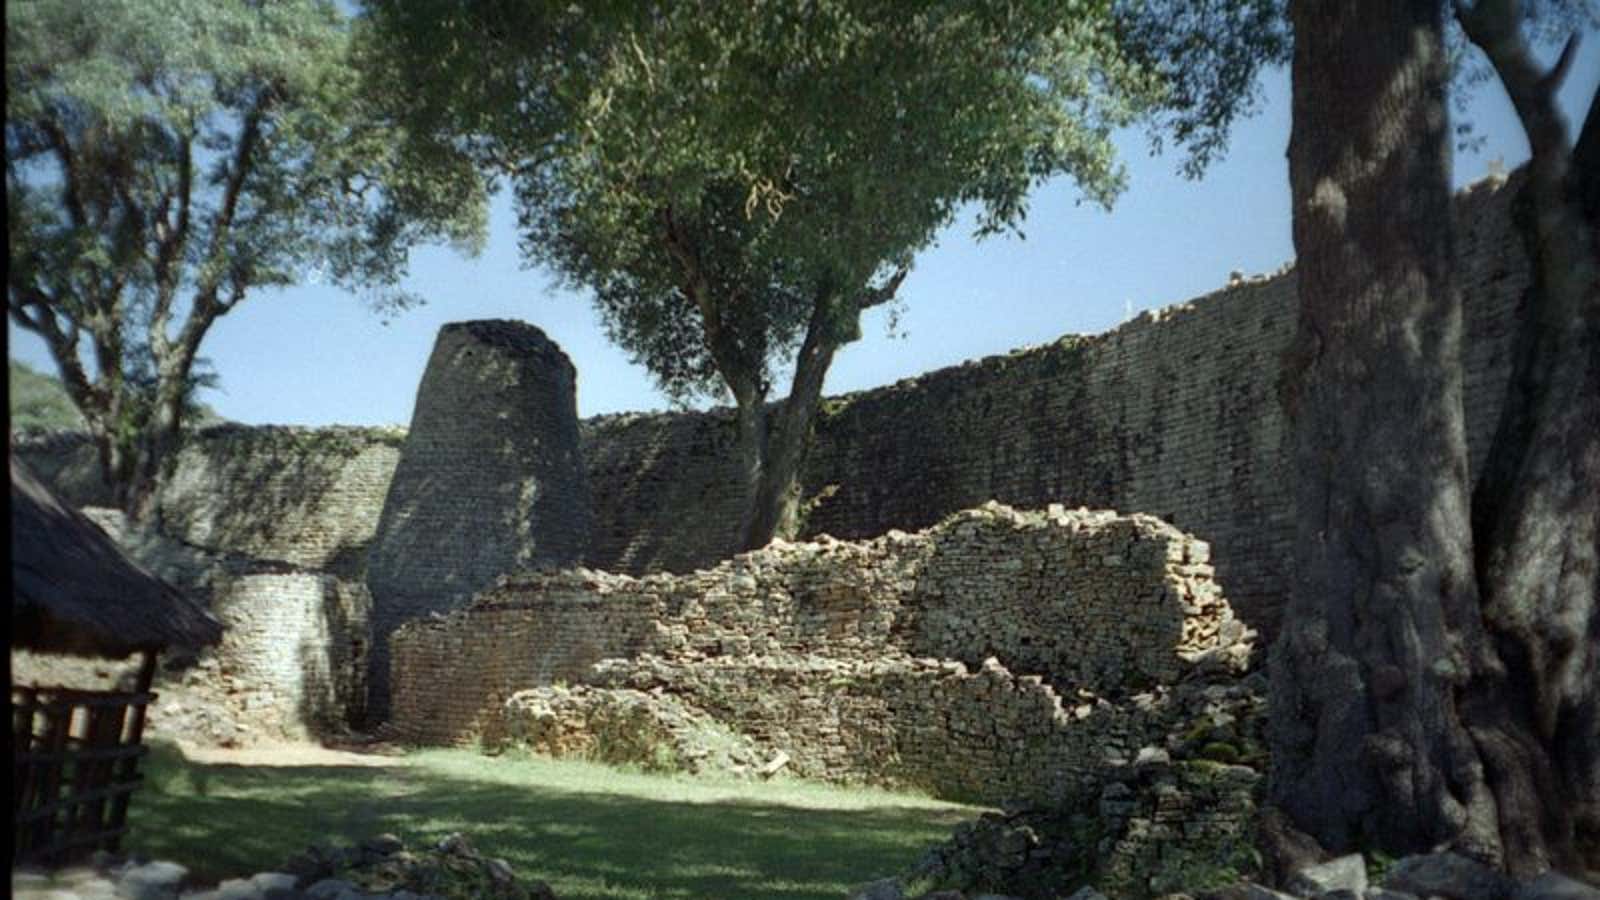 Inside of the Great Enclosure which is part of the Great Zimbabwe ruins.